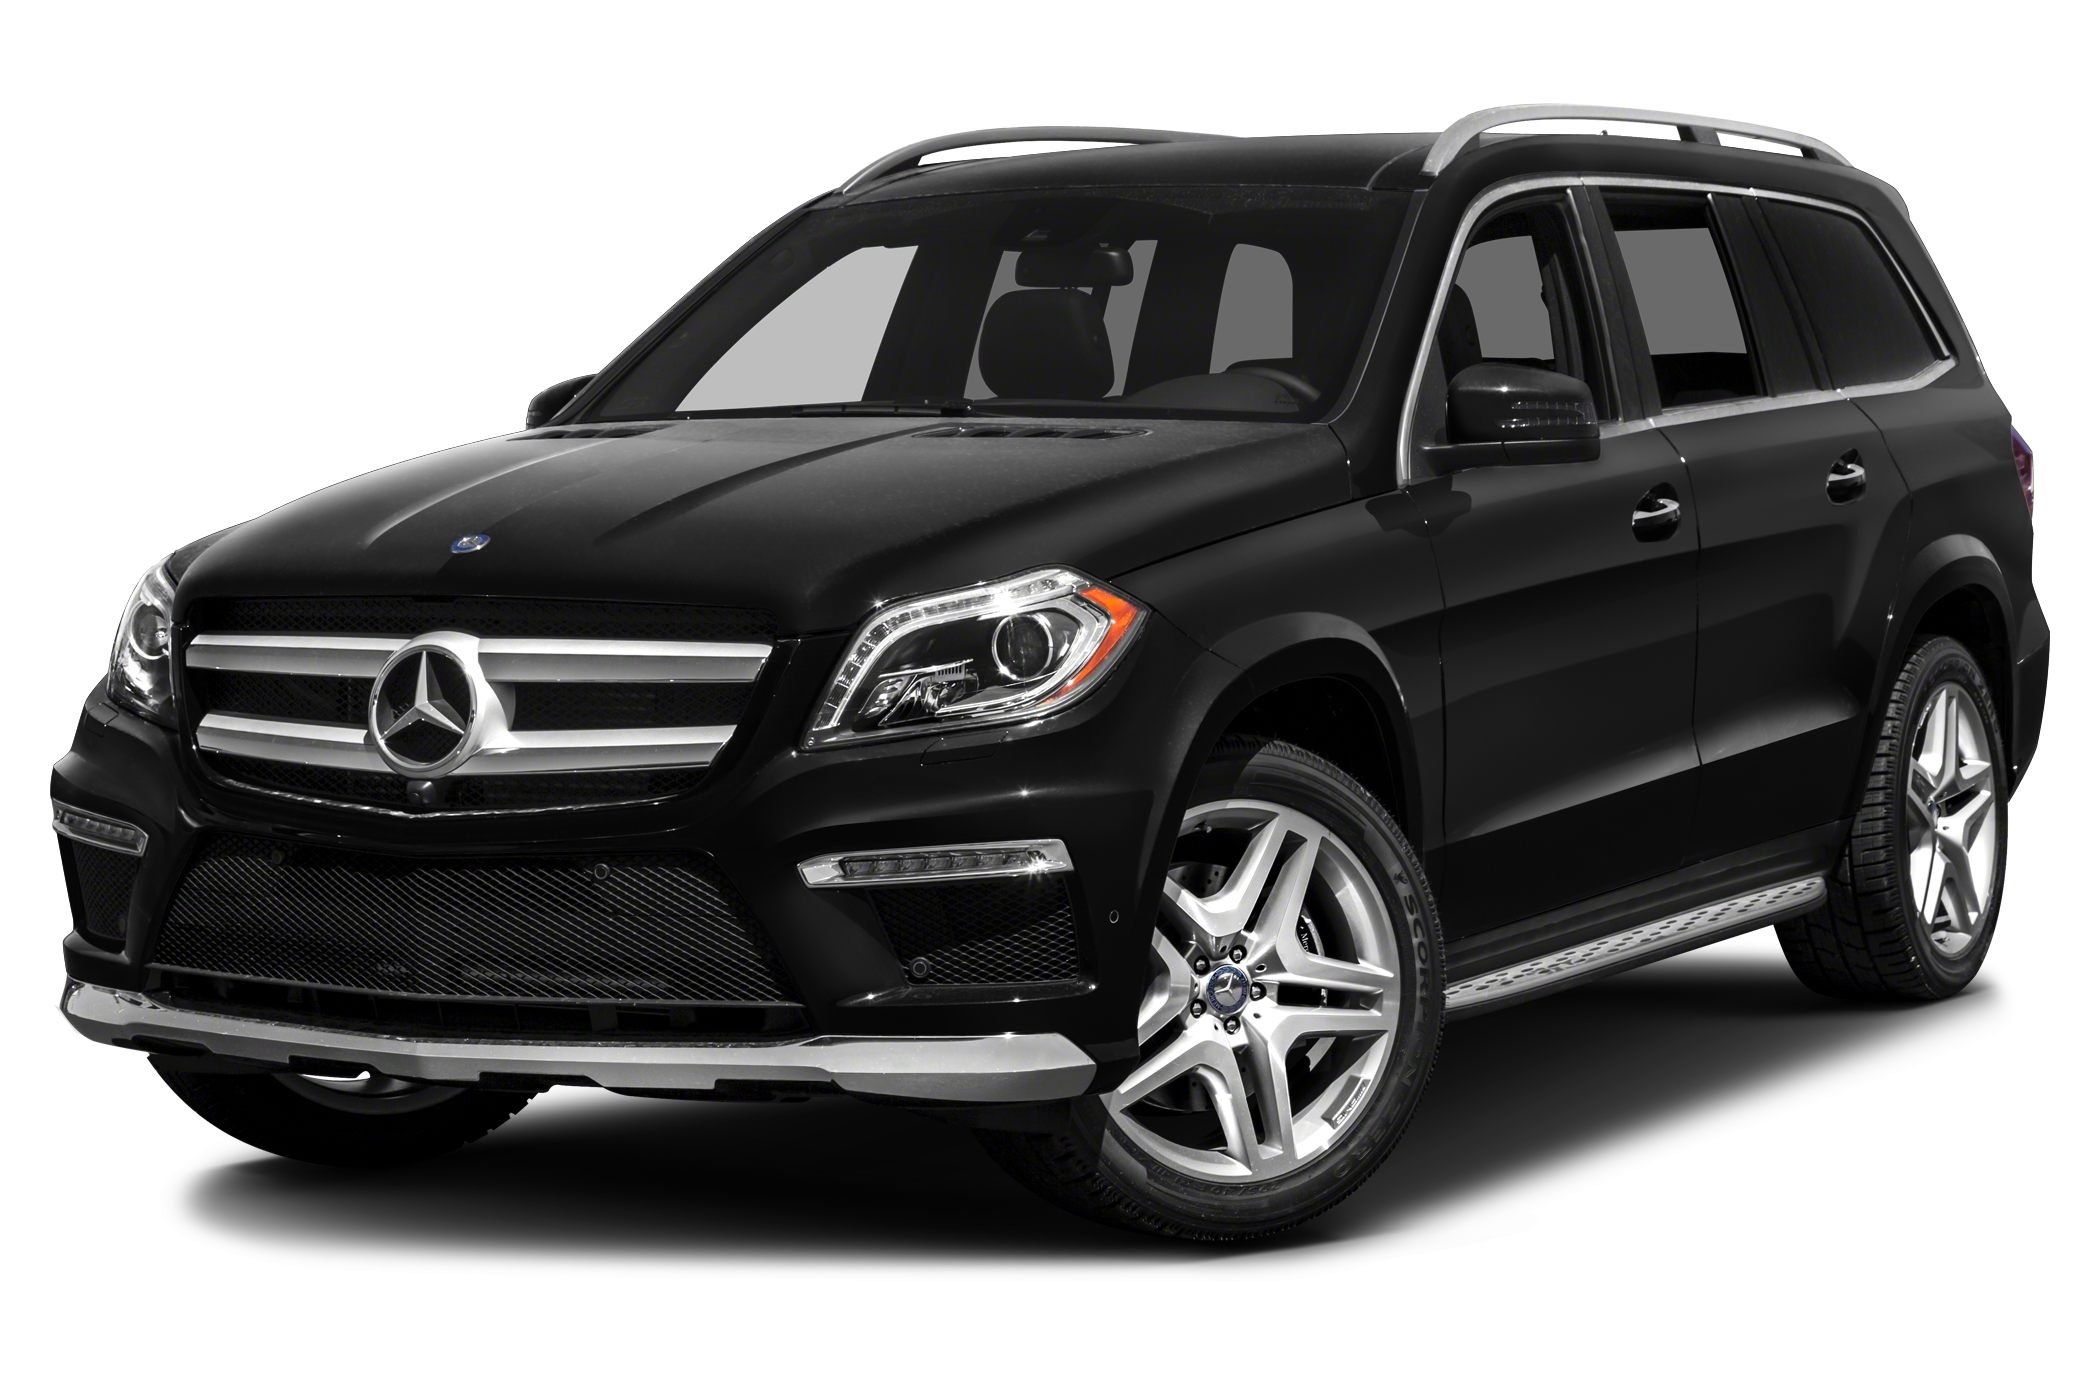 Used mercedes benz for sale in los angeles ca #4